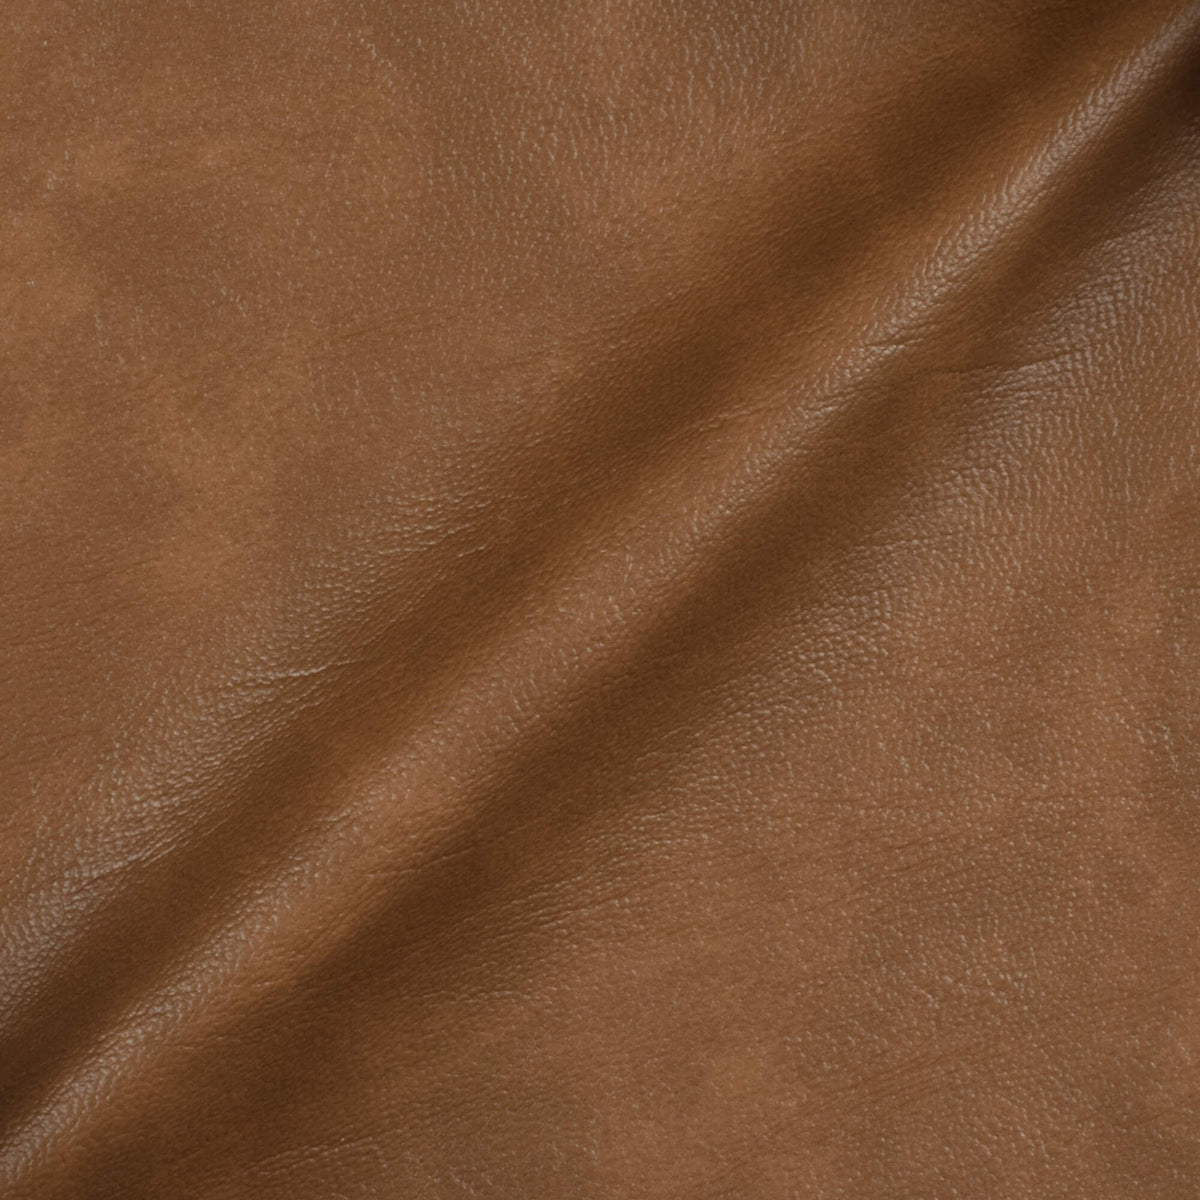 Walnut Brown Self Textured Exclusive Sofa Fabric (Width 54 Inches)